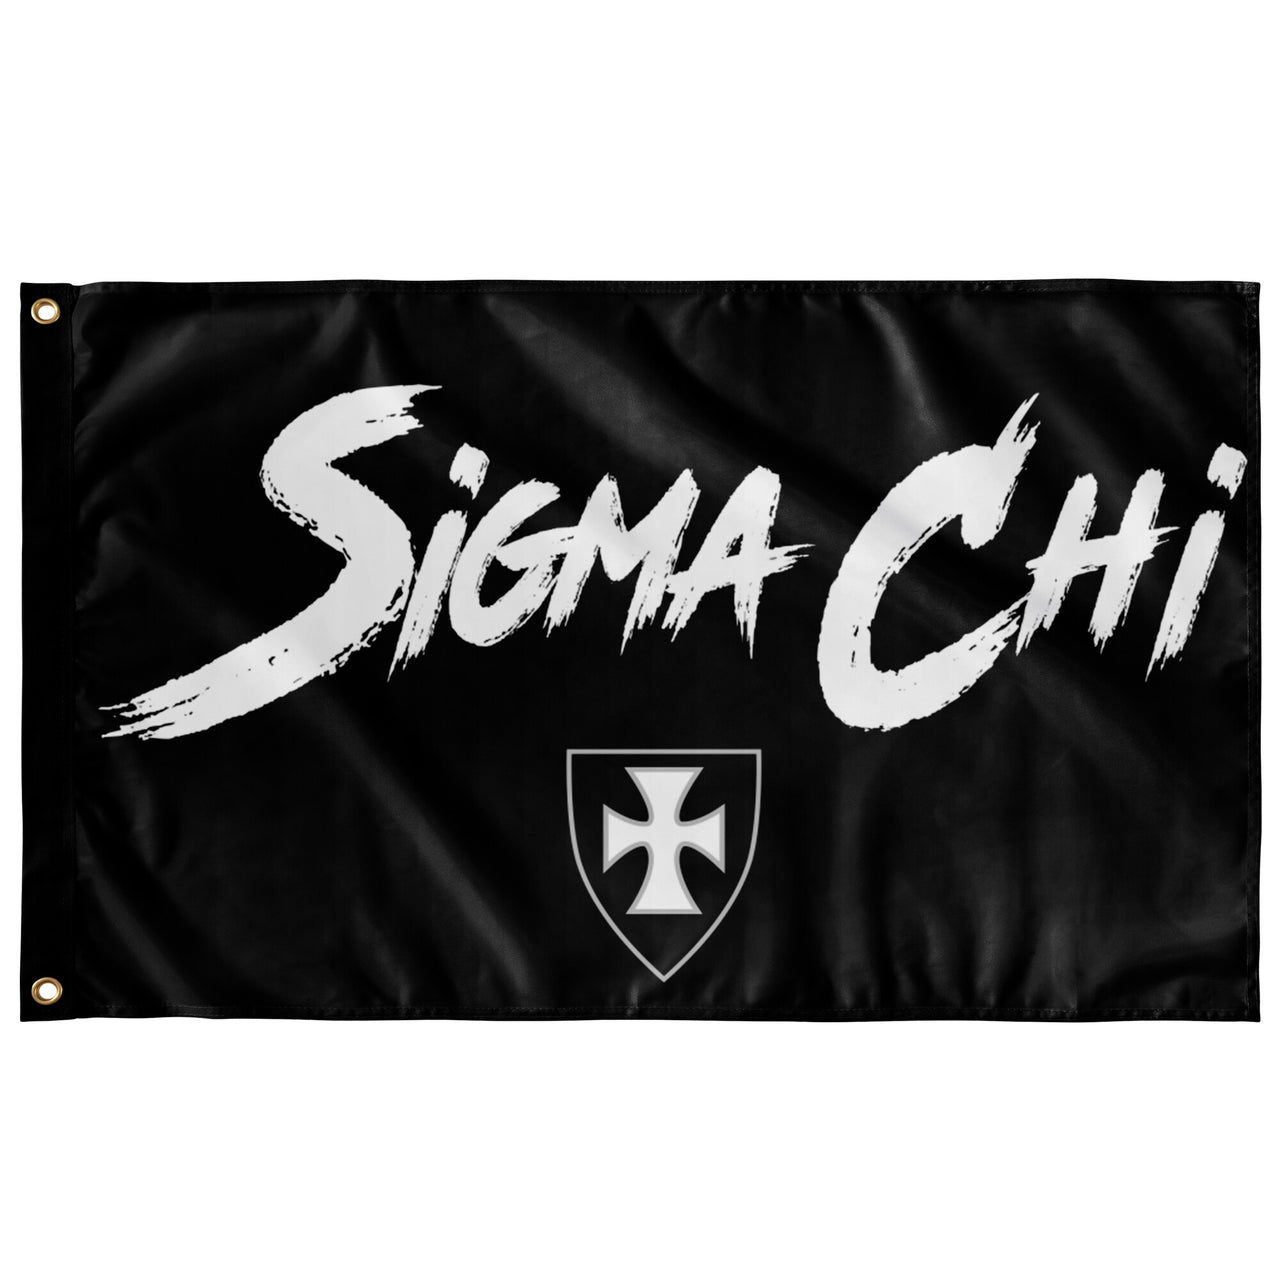 Sigma Chi Fighter Flag | Black and White